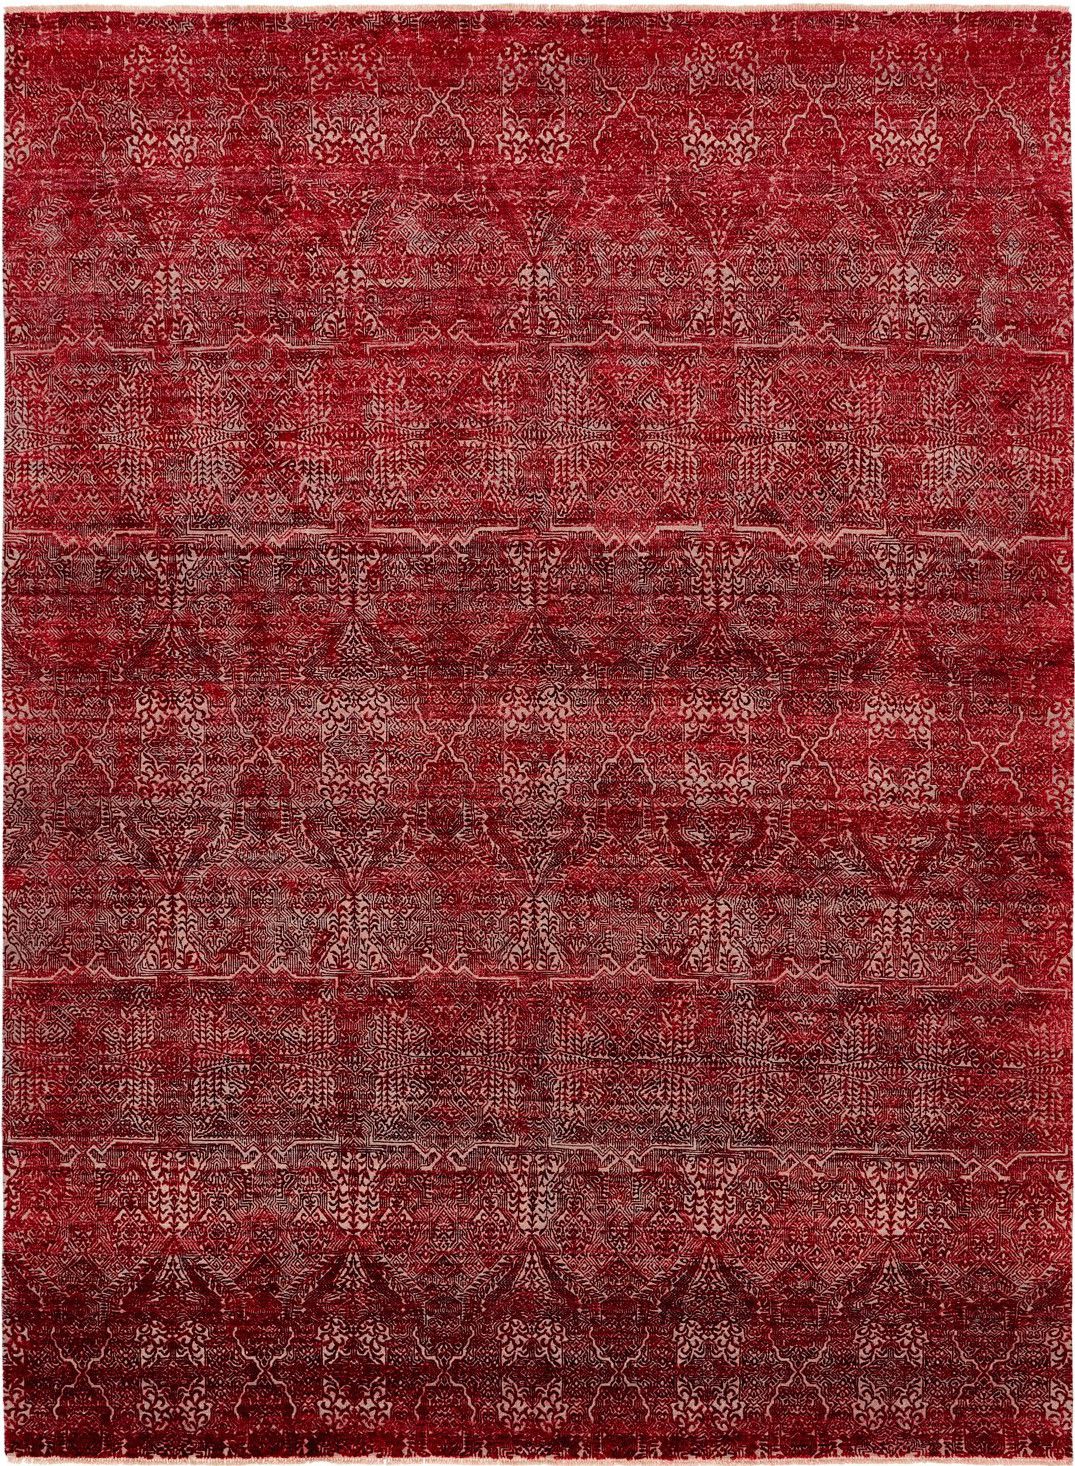 Red rugs 20 best red rugs - red runners and area rugs WKFHRII